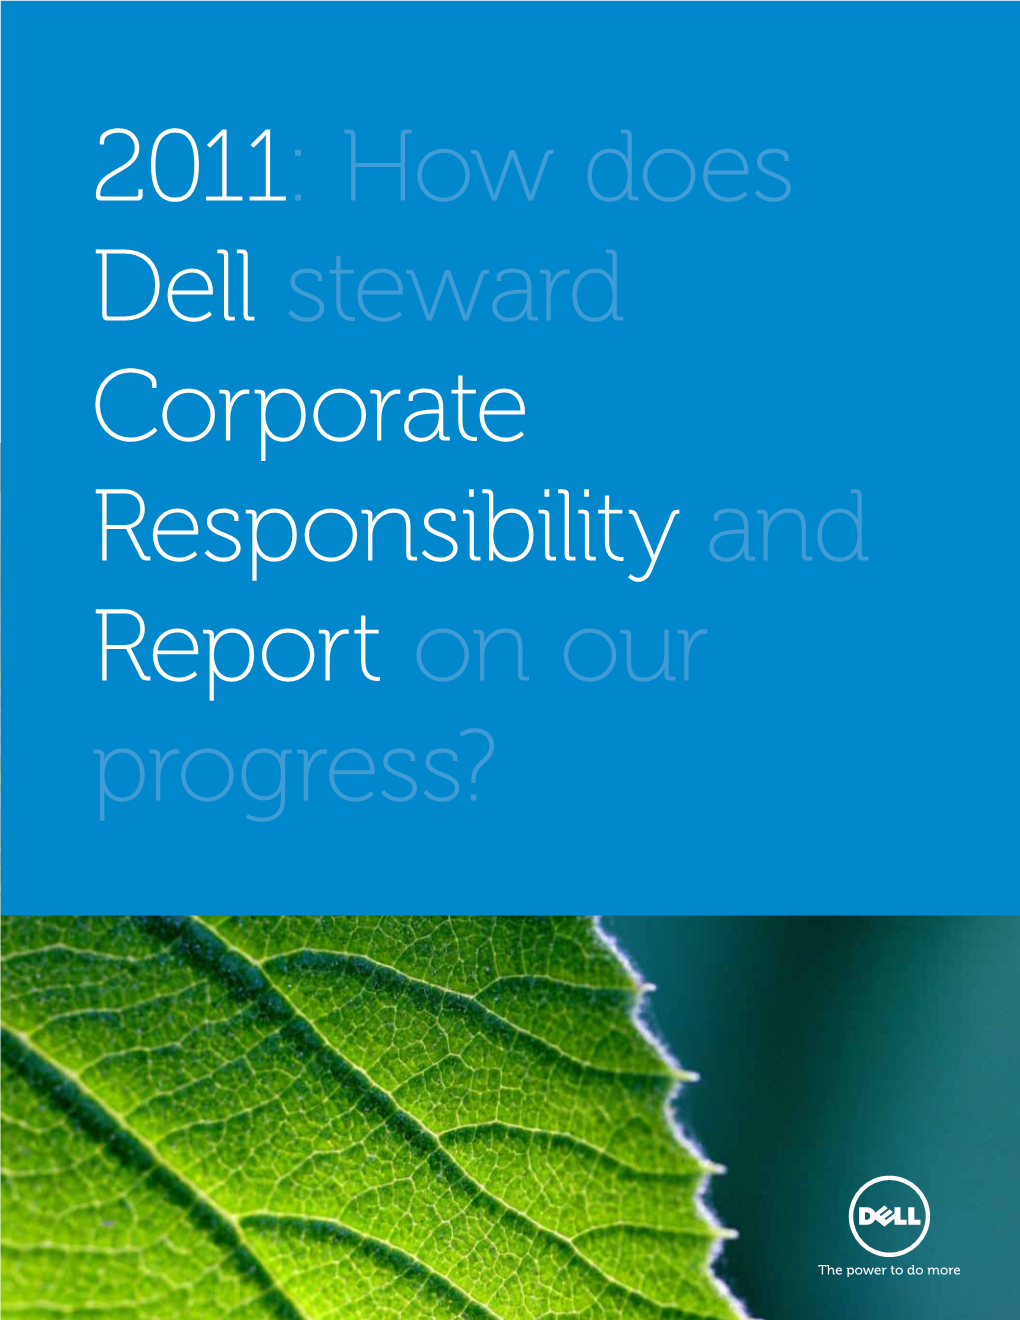 2011: How Does Dell Steward Corporate Responsibility and Report on Our Progress? Table of Contents